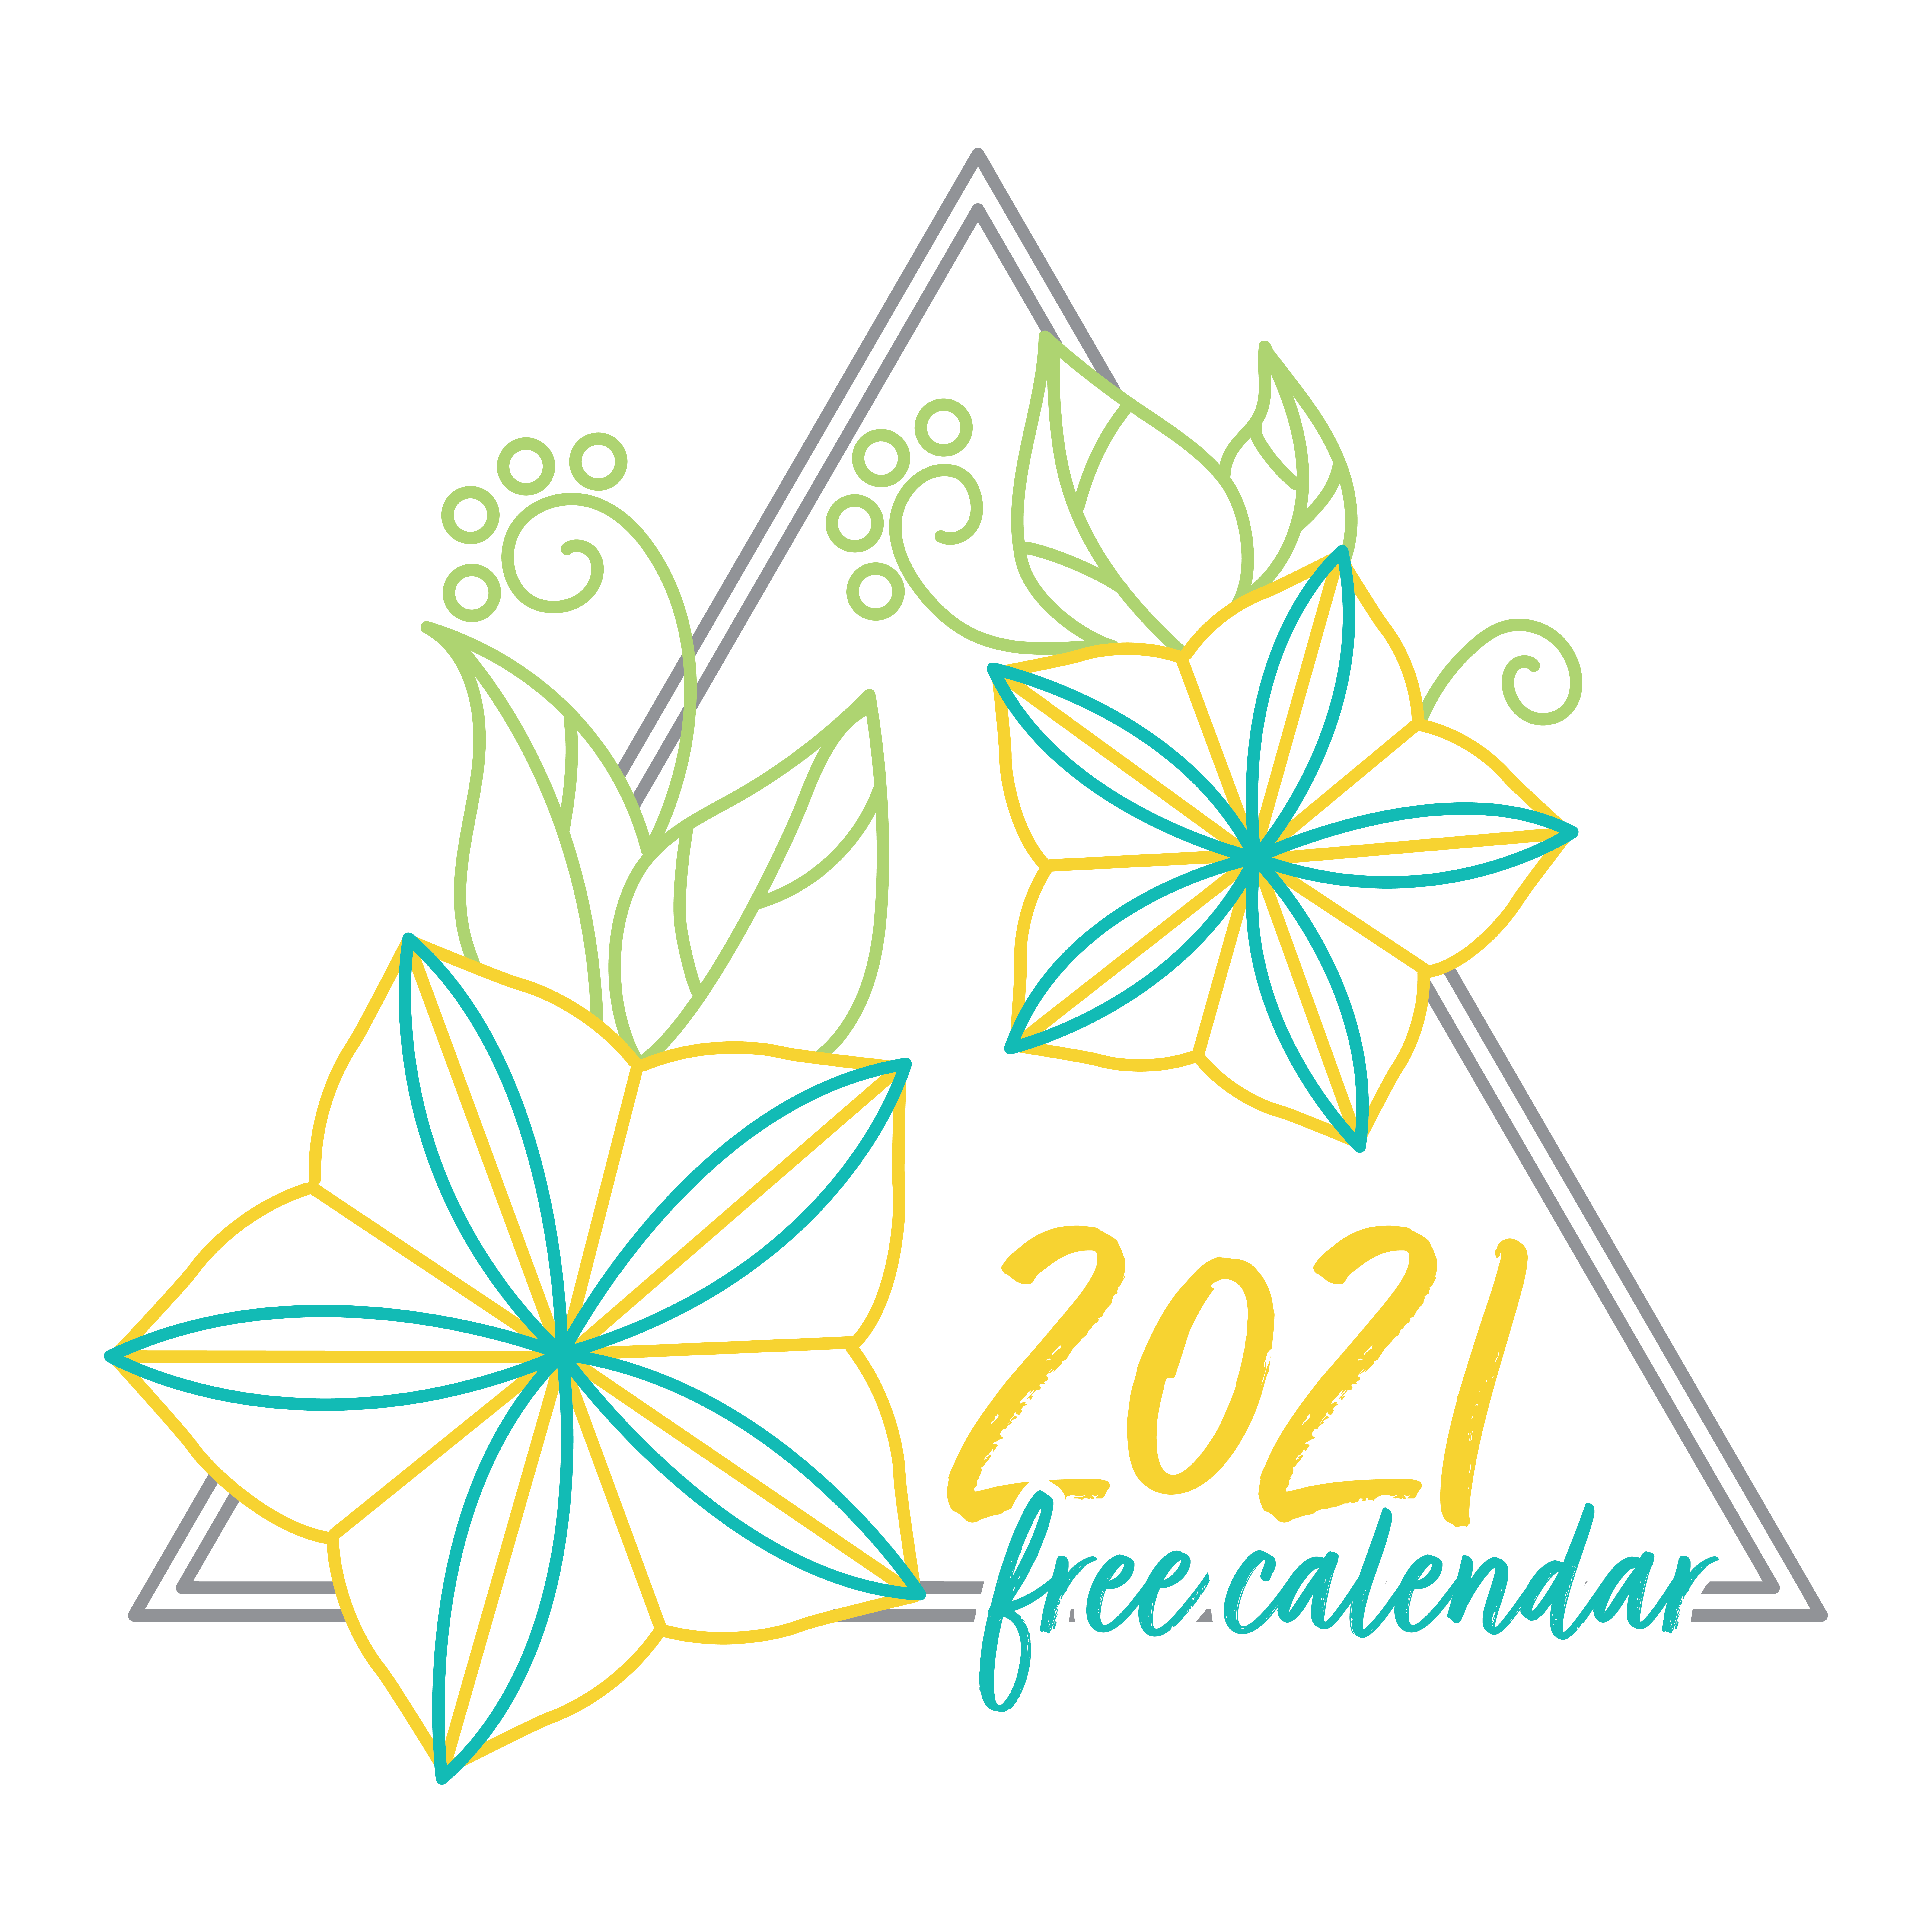 Flowers in triangle in yellow, green, and aqua - 2021 calendar design in text.